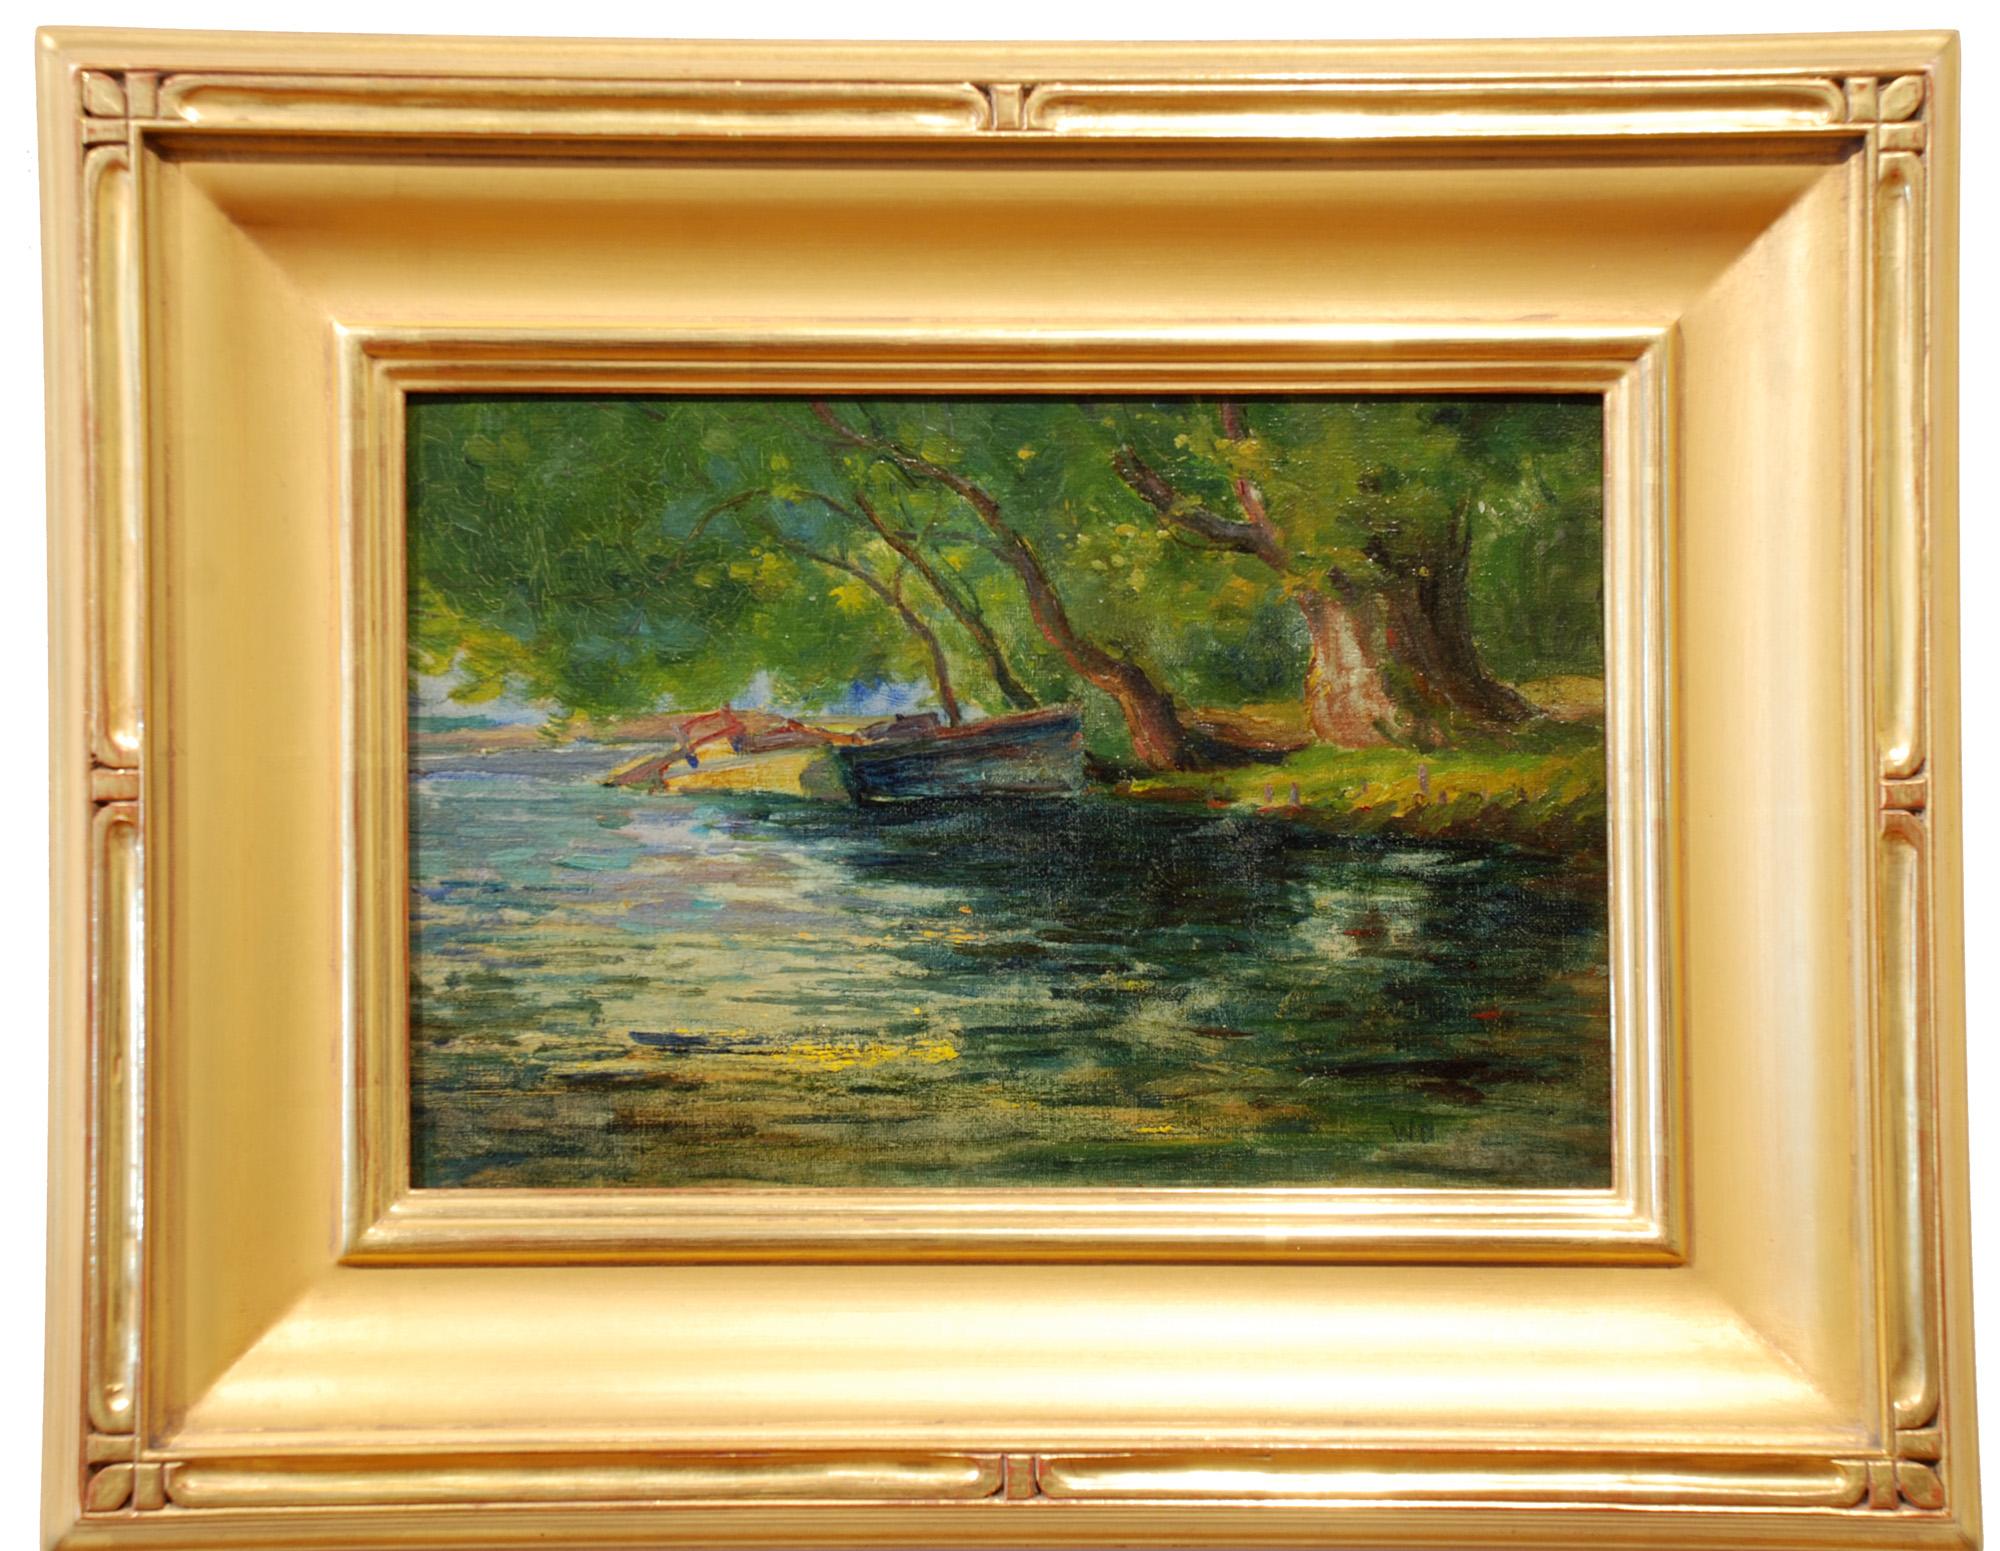 Willows at the Edge of the River, Impressionist, Rural Landscape - Painting by William Dennis